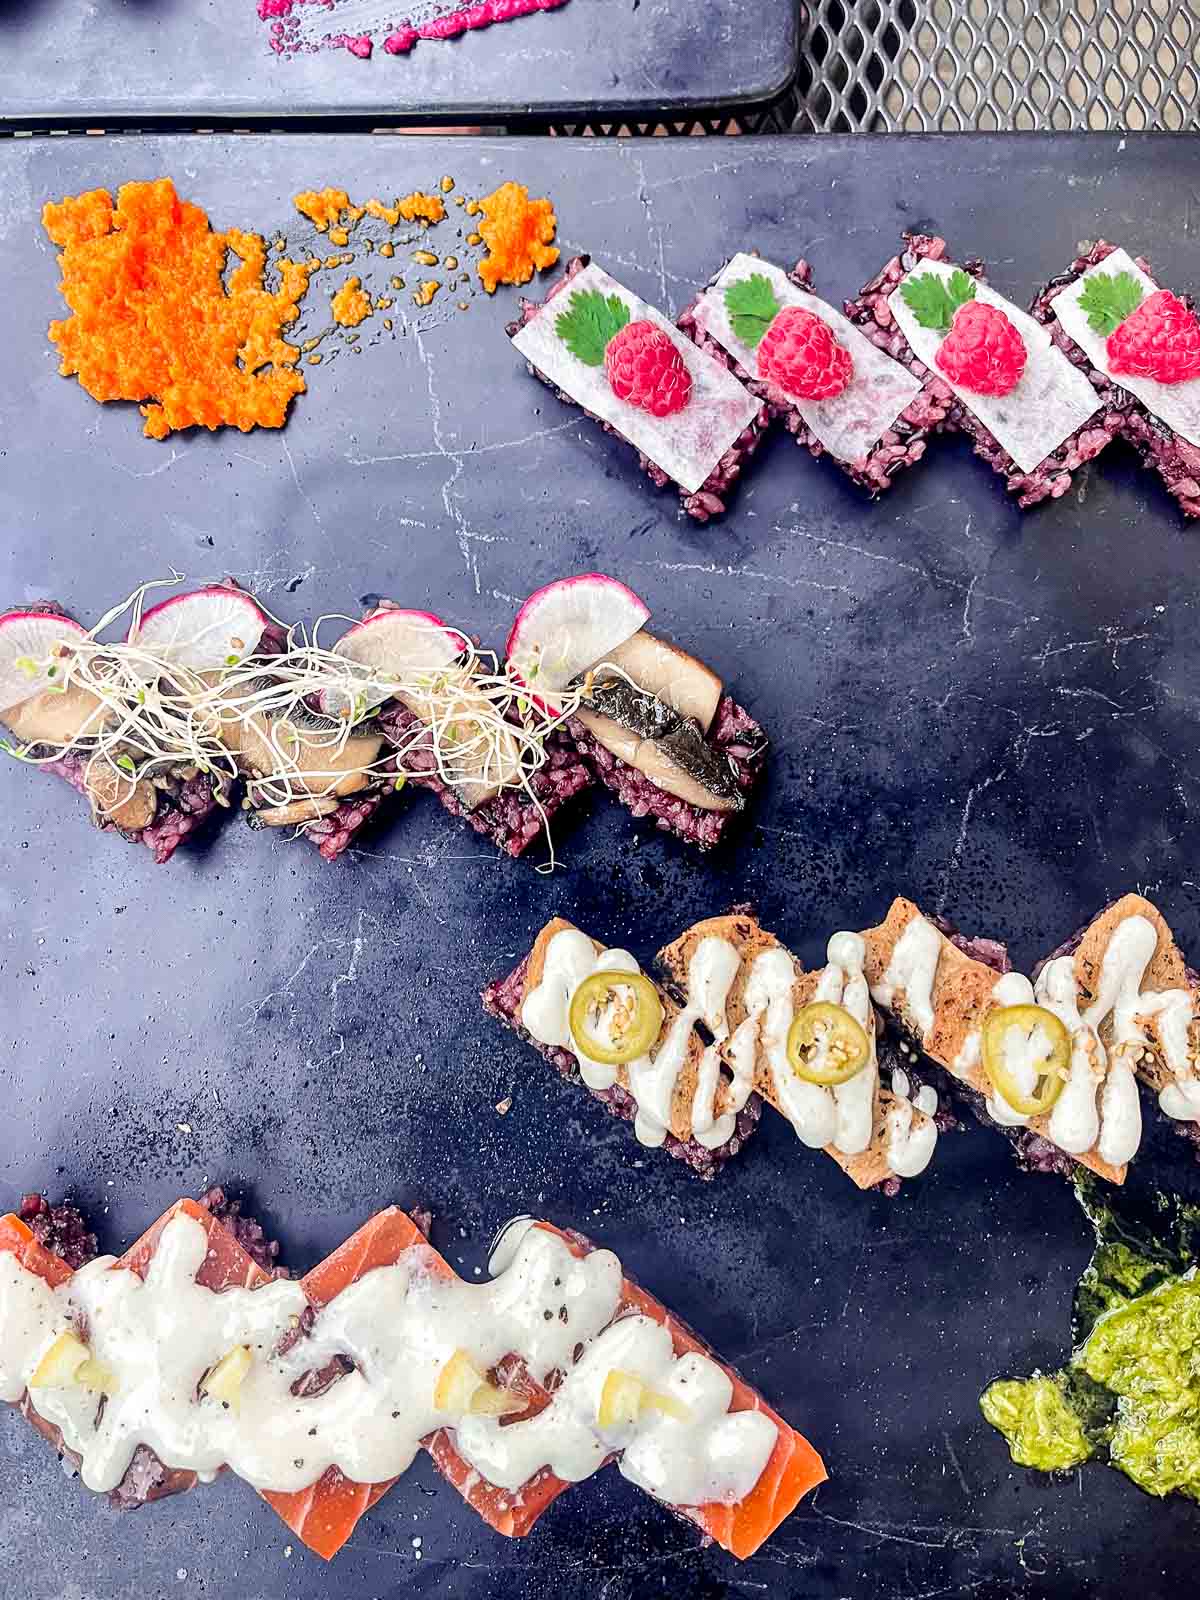 25 Best Vegan Restaurants in Vancouver BC for 2023 - pressed sushi platter from COFU